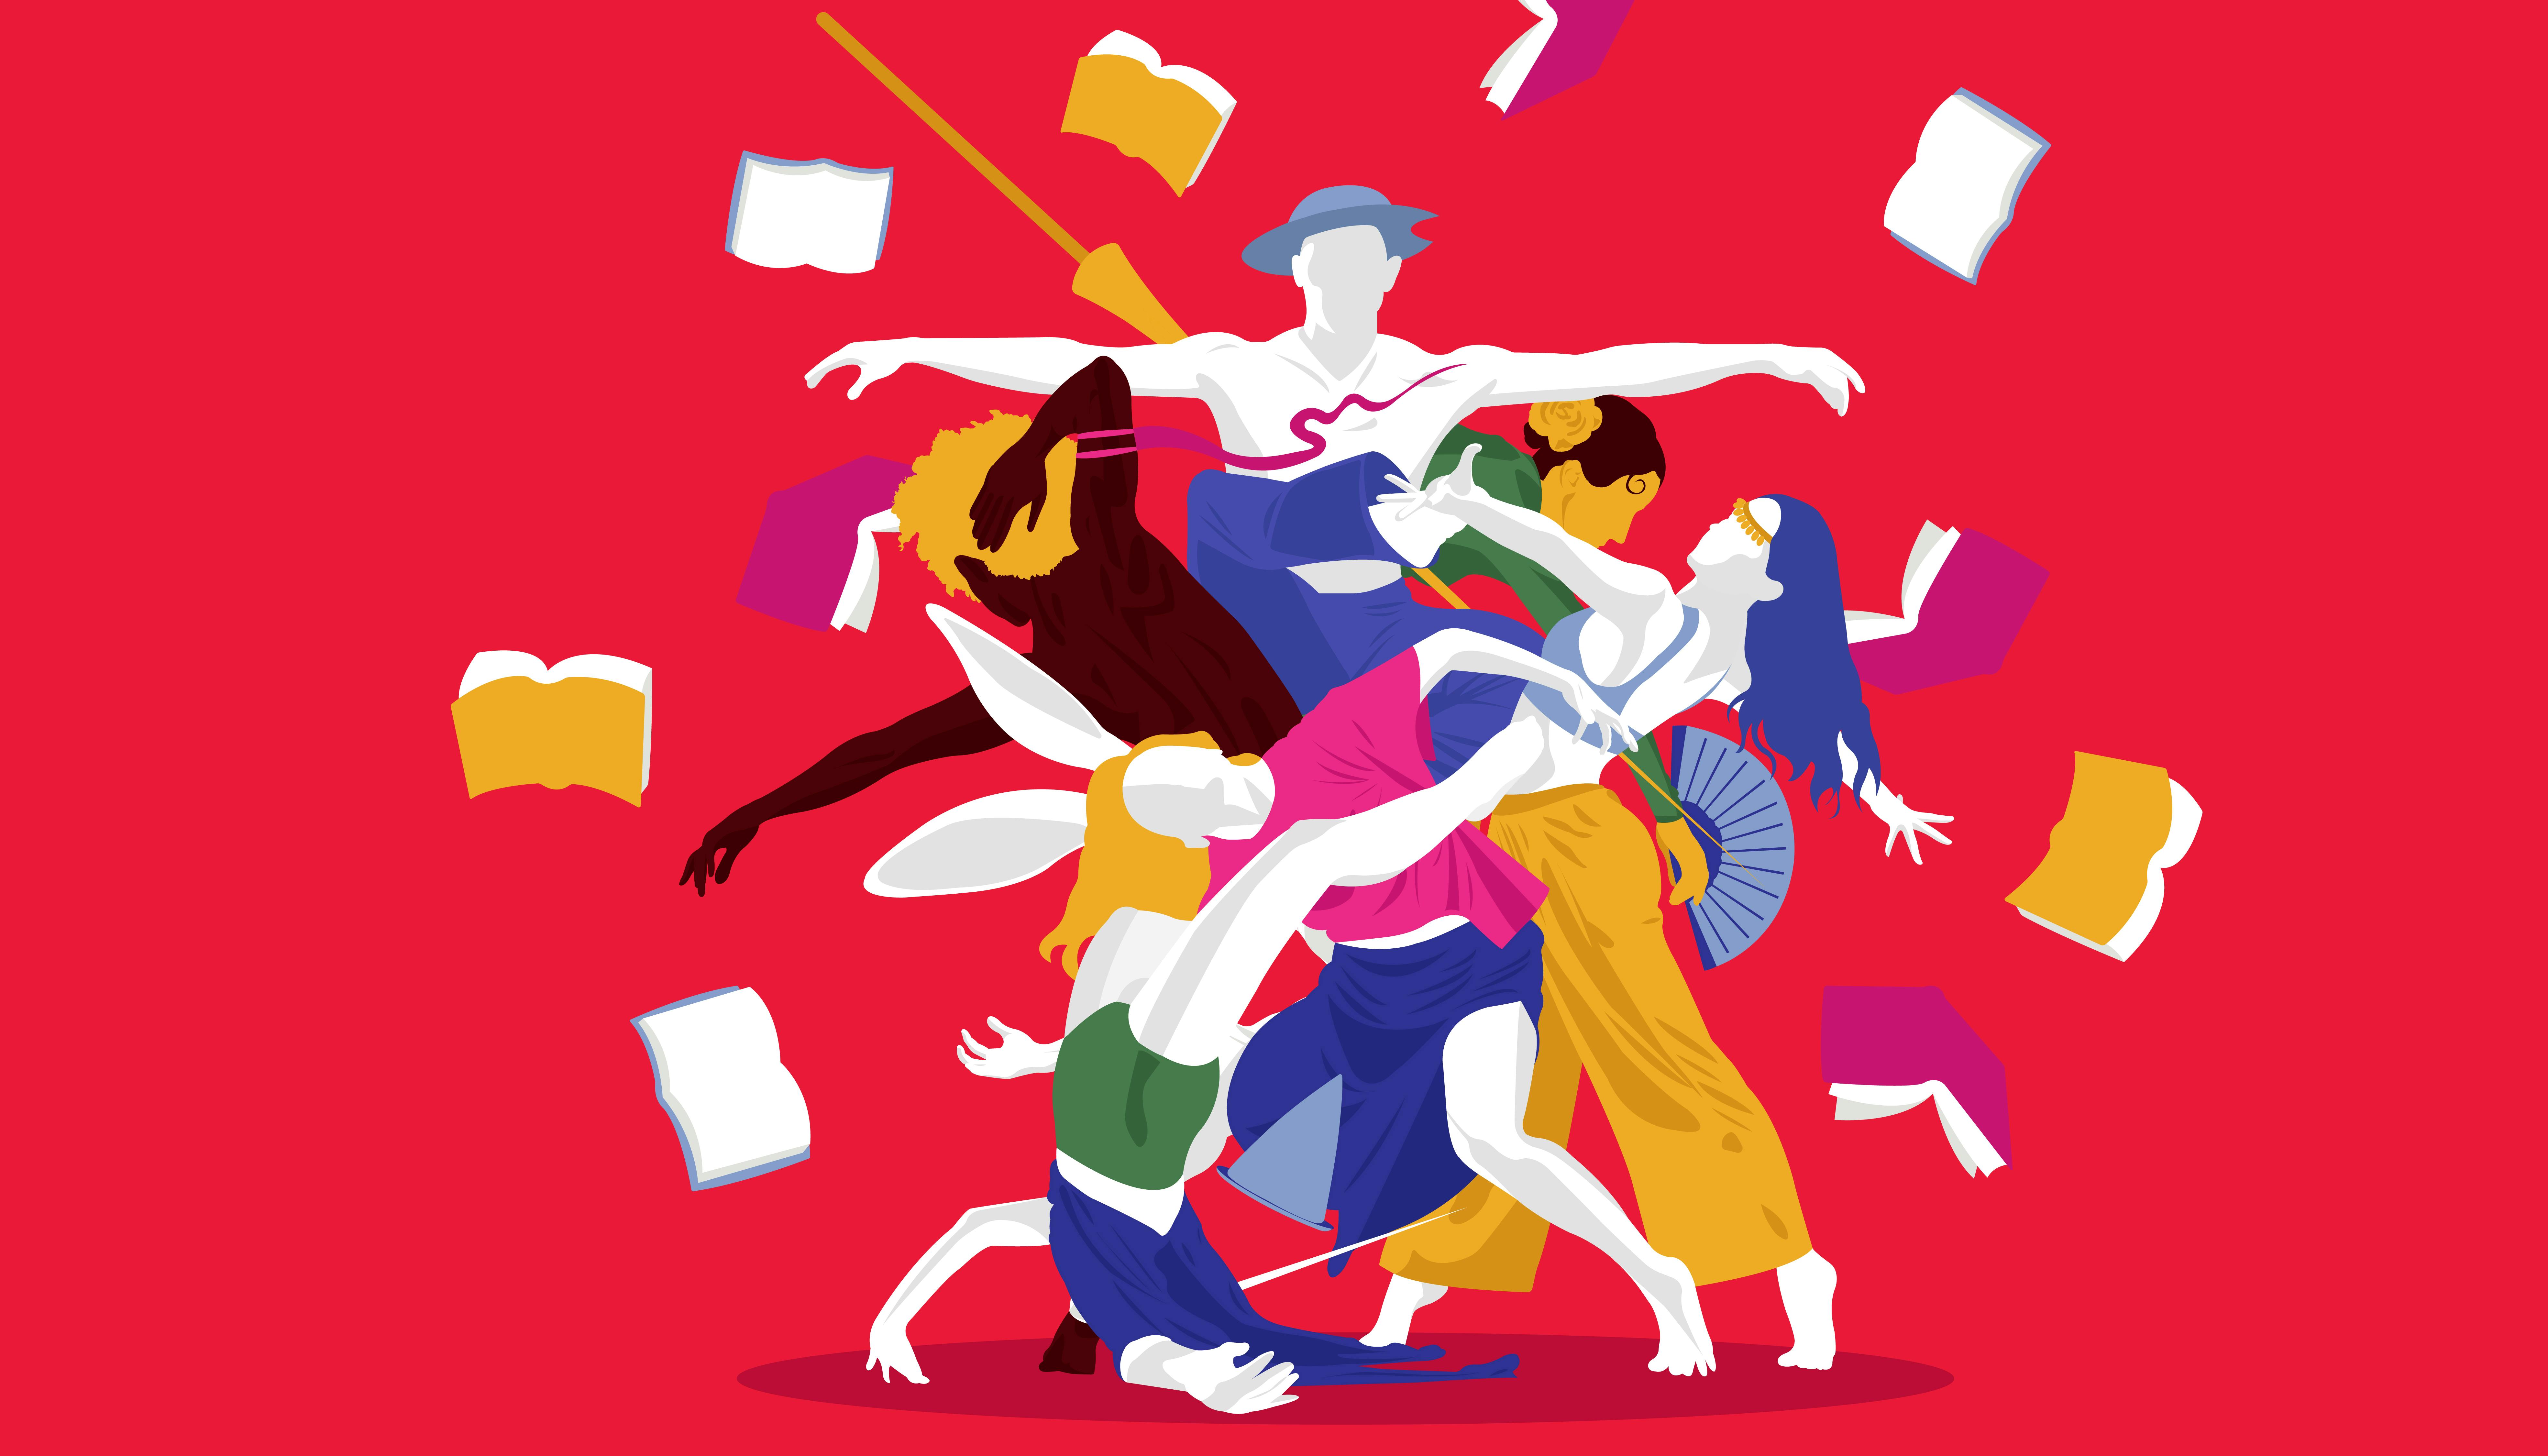 Illustration depicting a series of characters from literature as they perform dance moves. They are surrounded by open books suspended in the air.